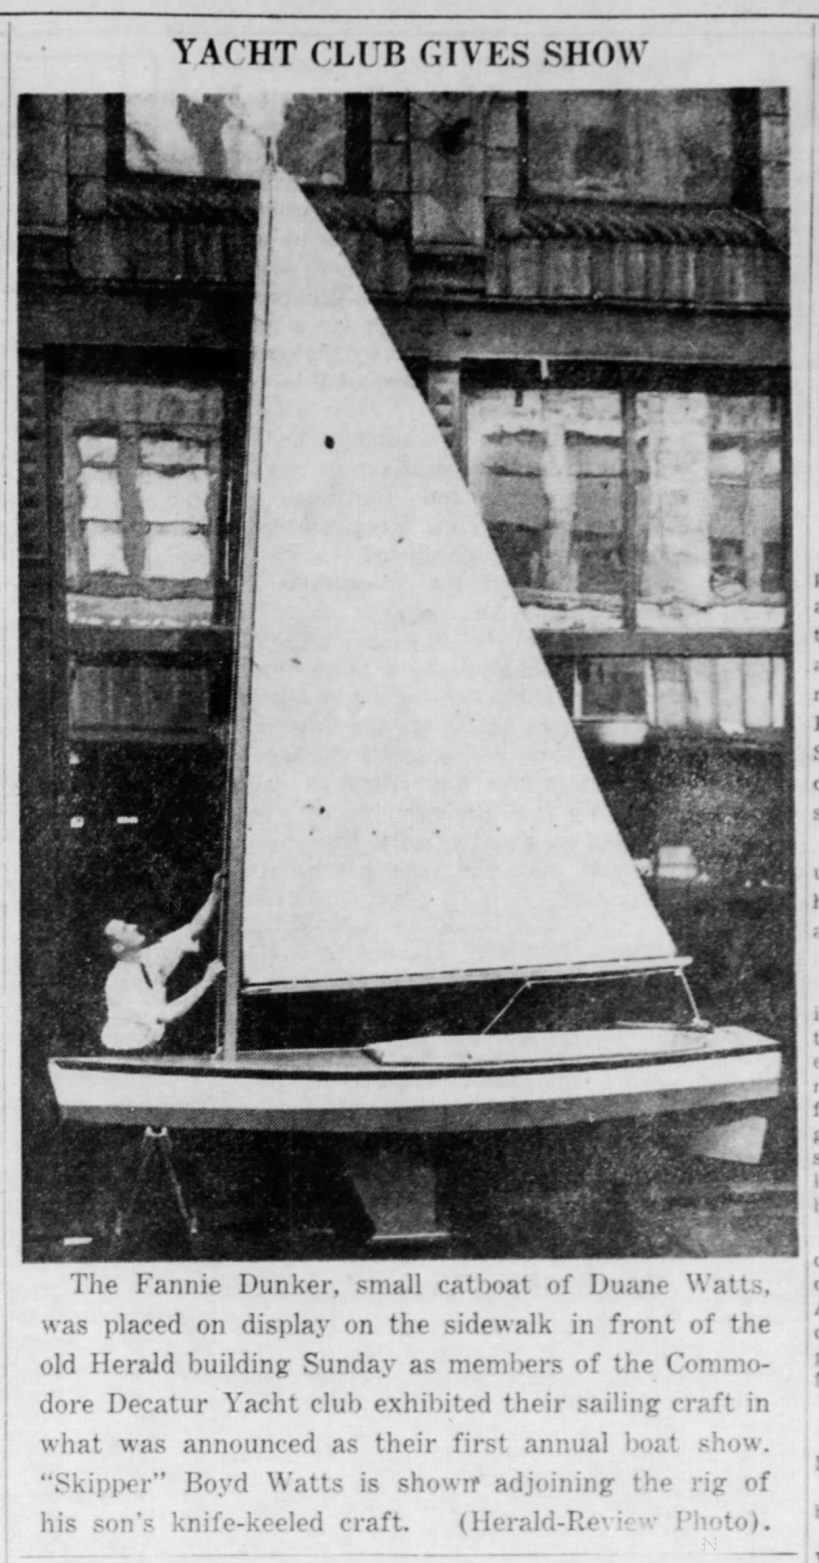 Duane Watts shows his sailing craft at annual boat show in 1937